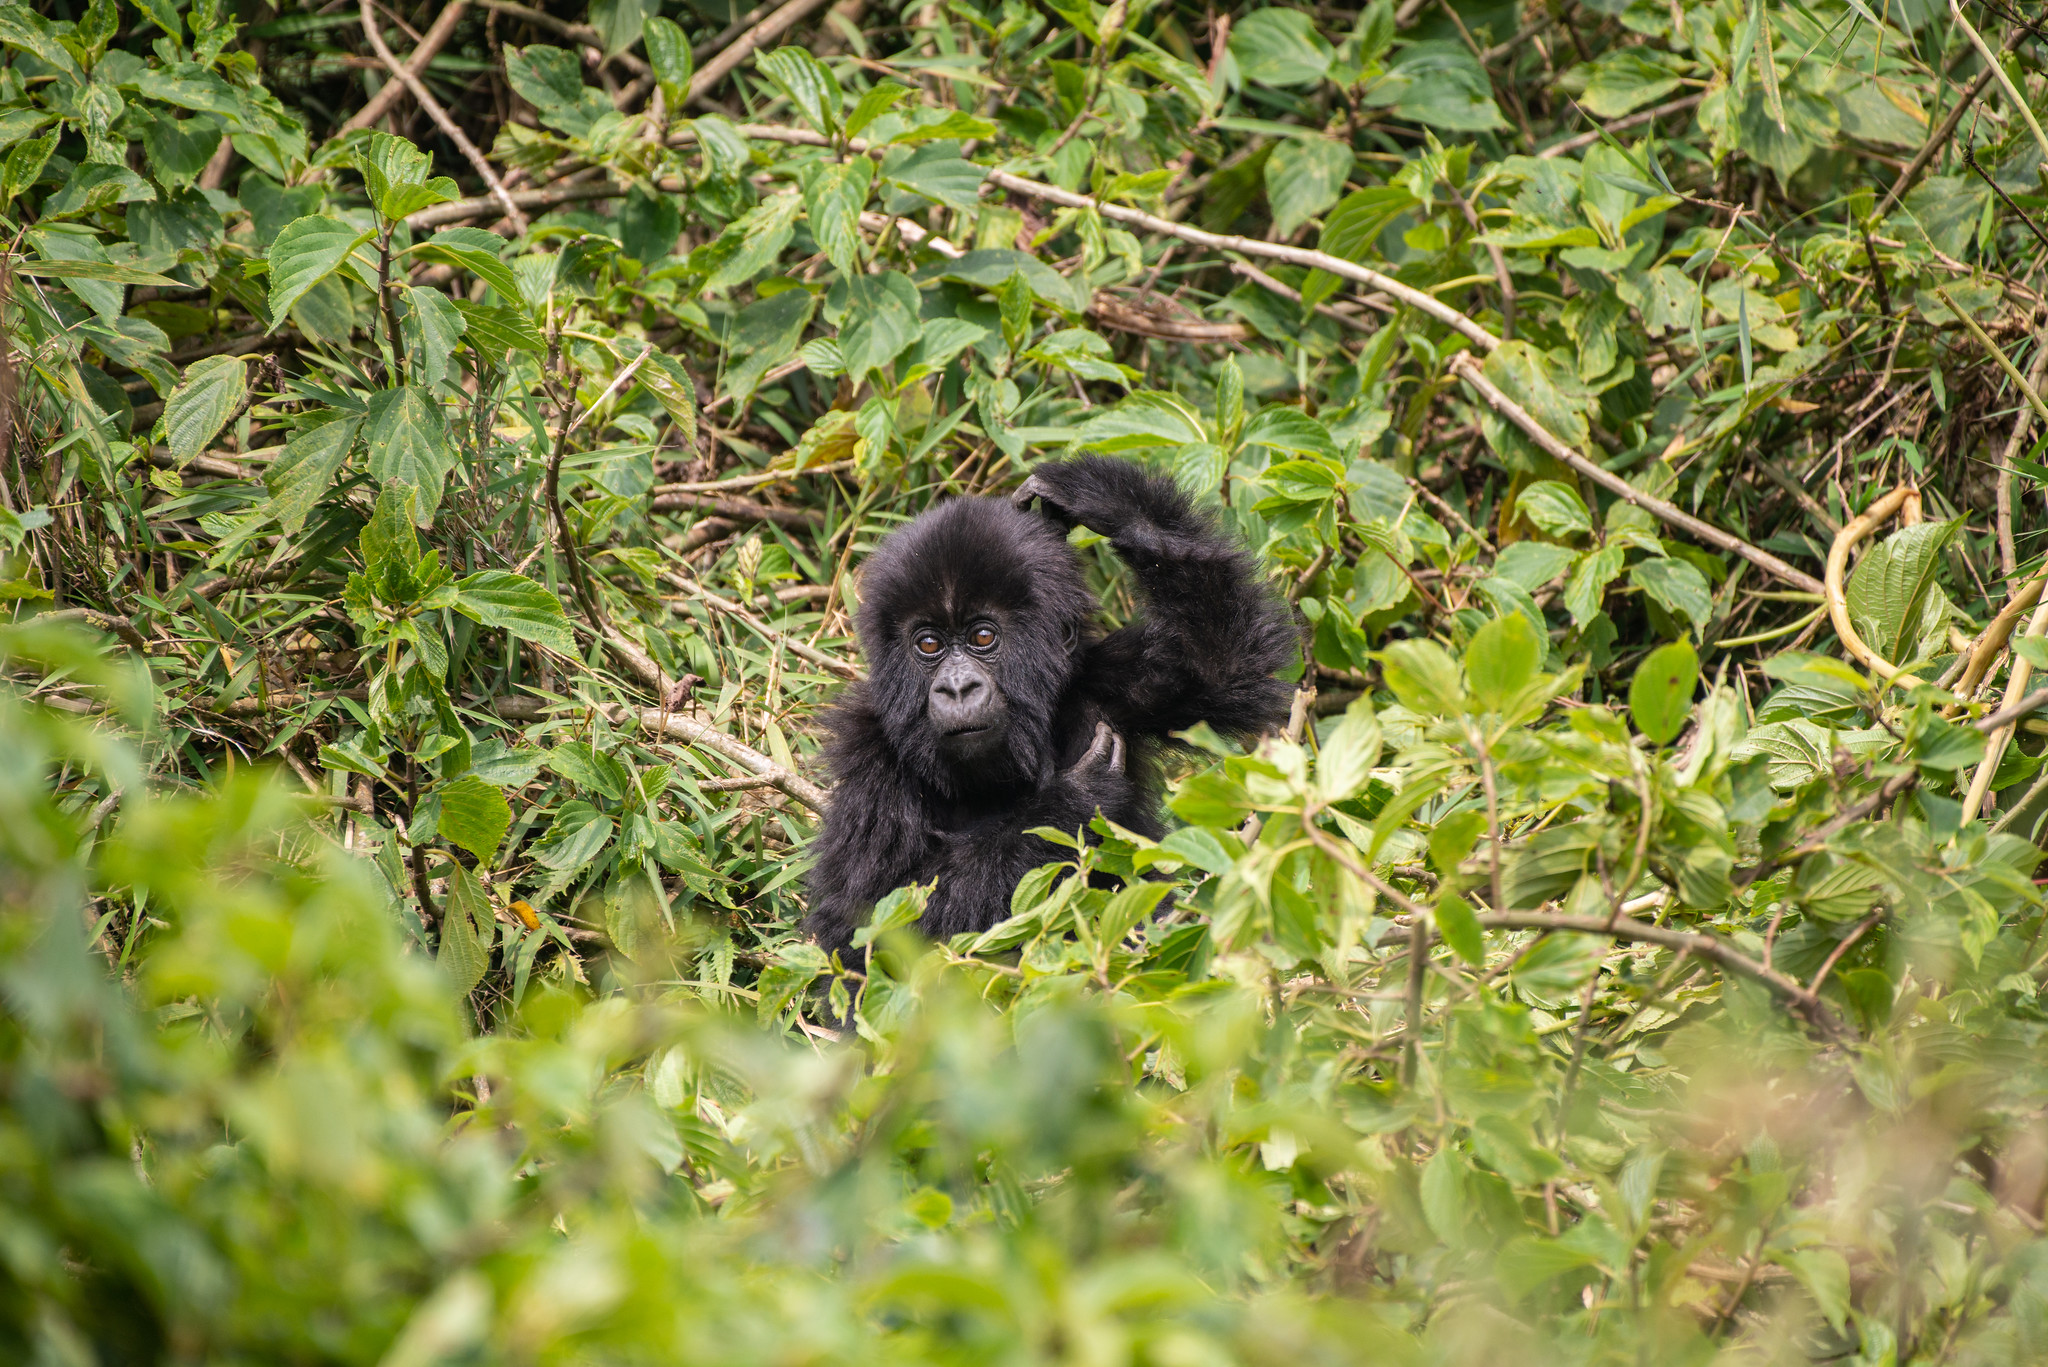 Mountain gorillas are endangered but have seen numbers increase thanks to conservation efforts (Rwanda Development Board/PA)